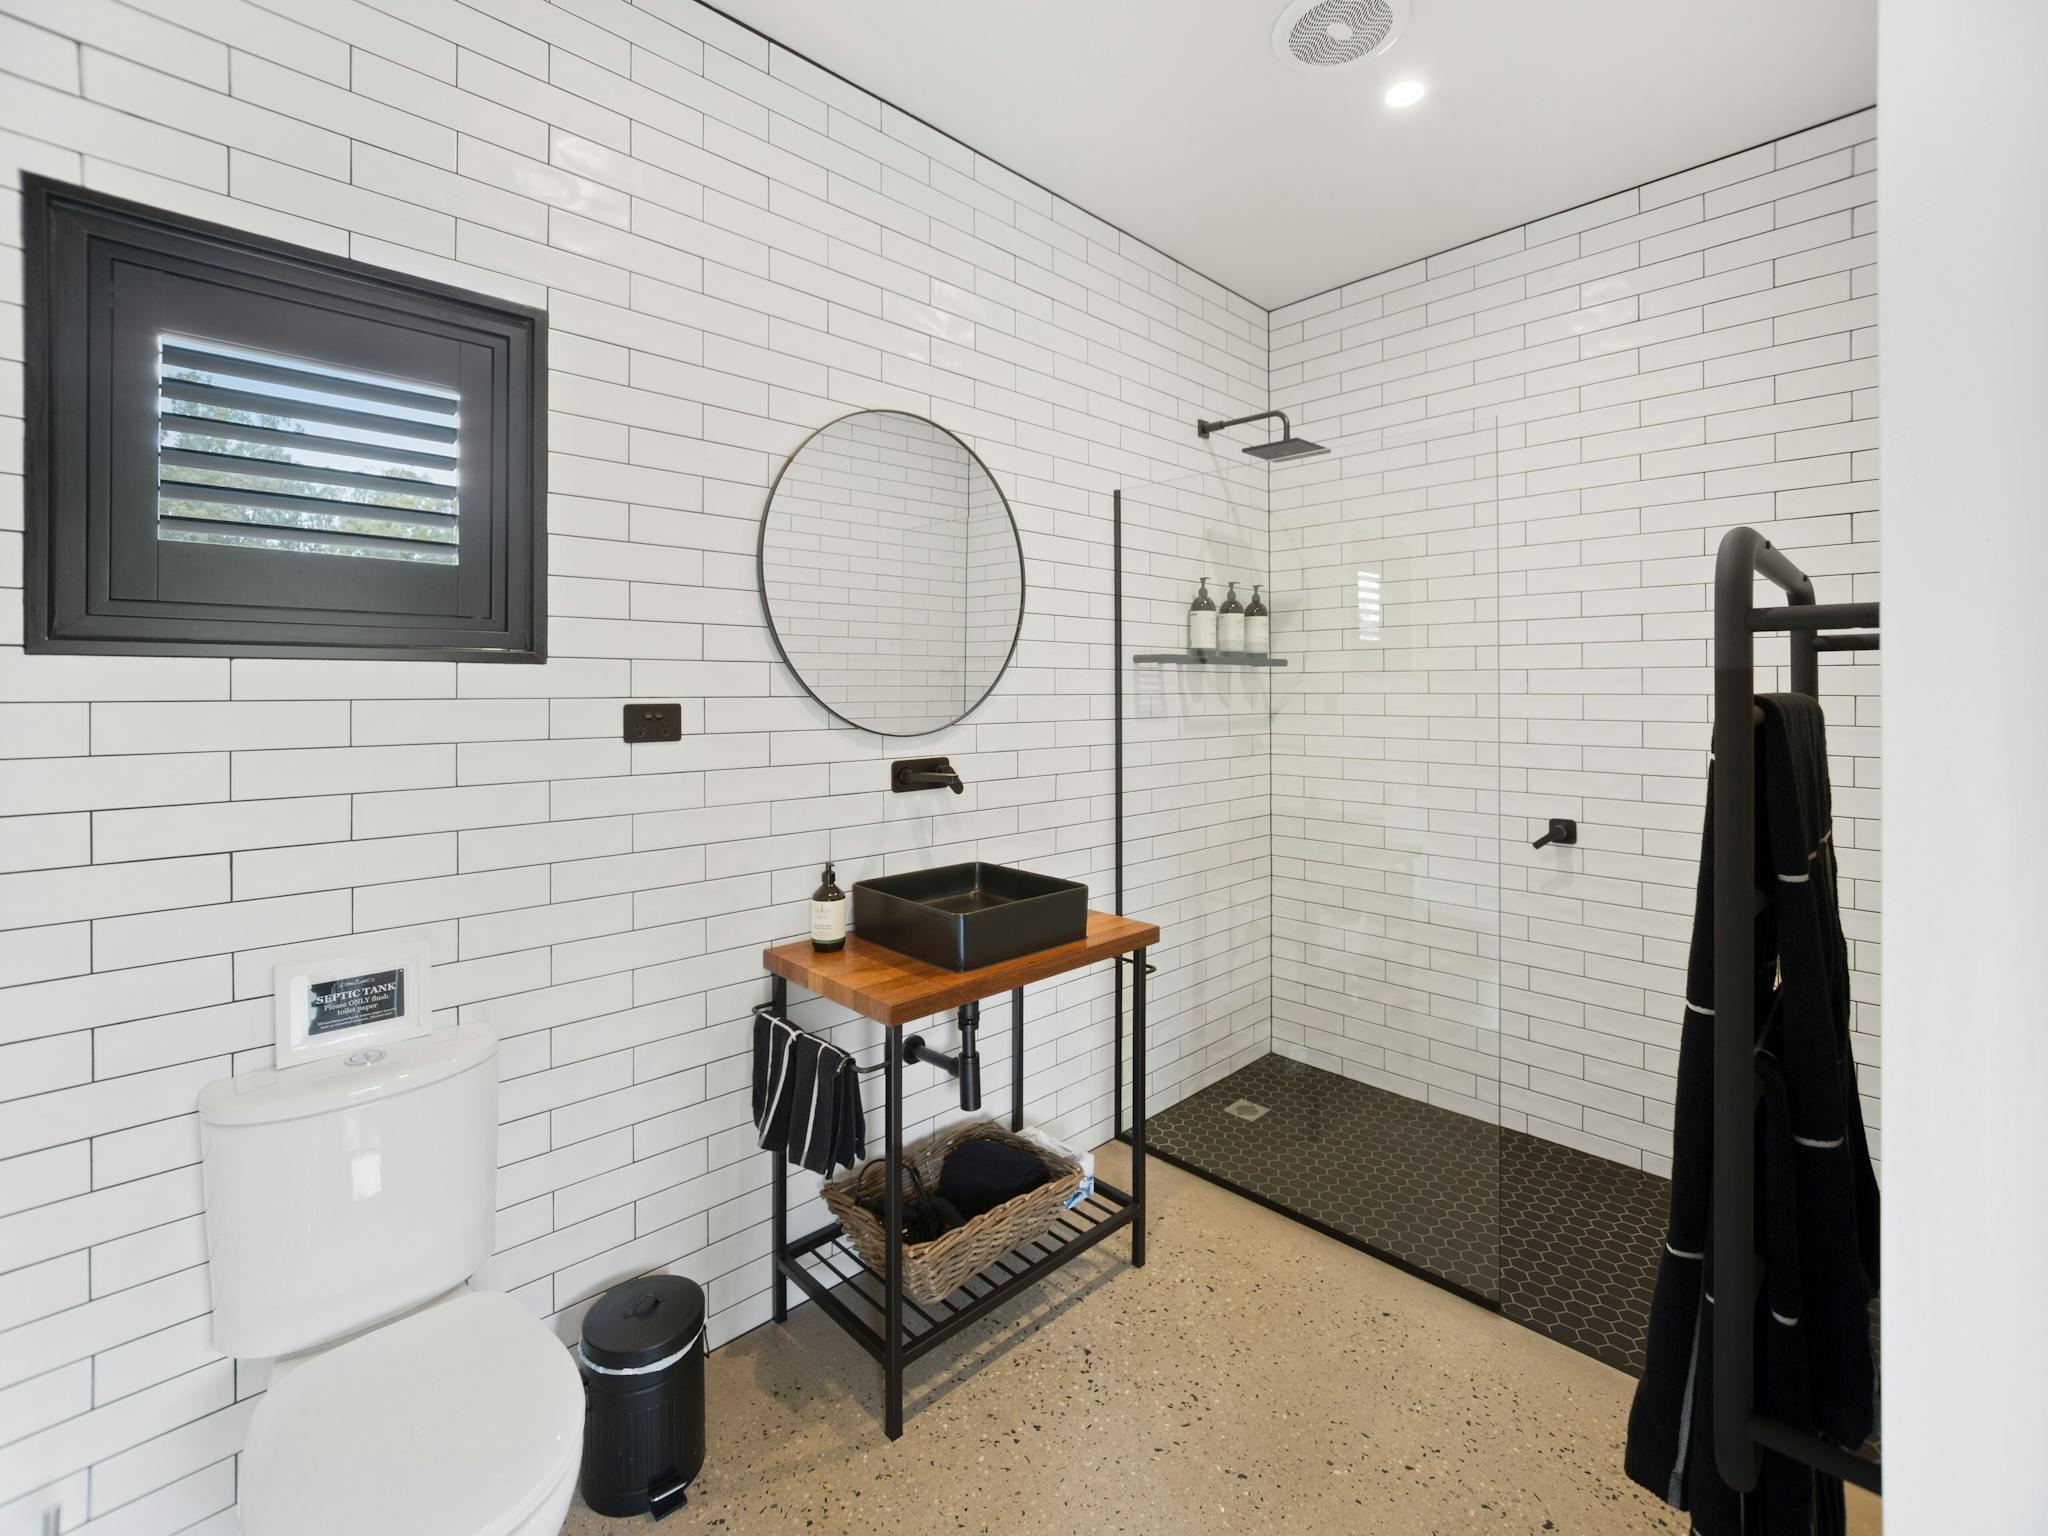 Full sized en-suite with white  subway tiles, black grout and fittings, marimekko towels